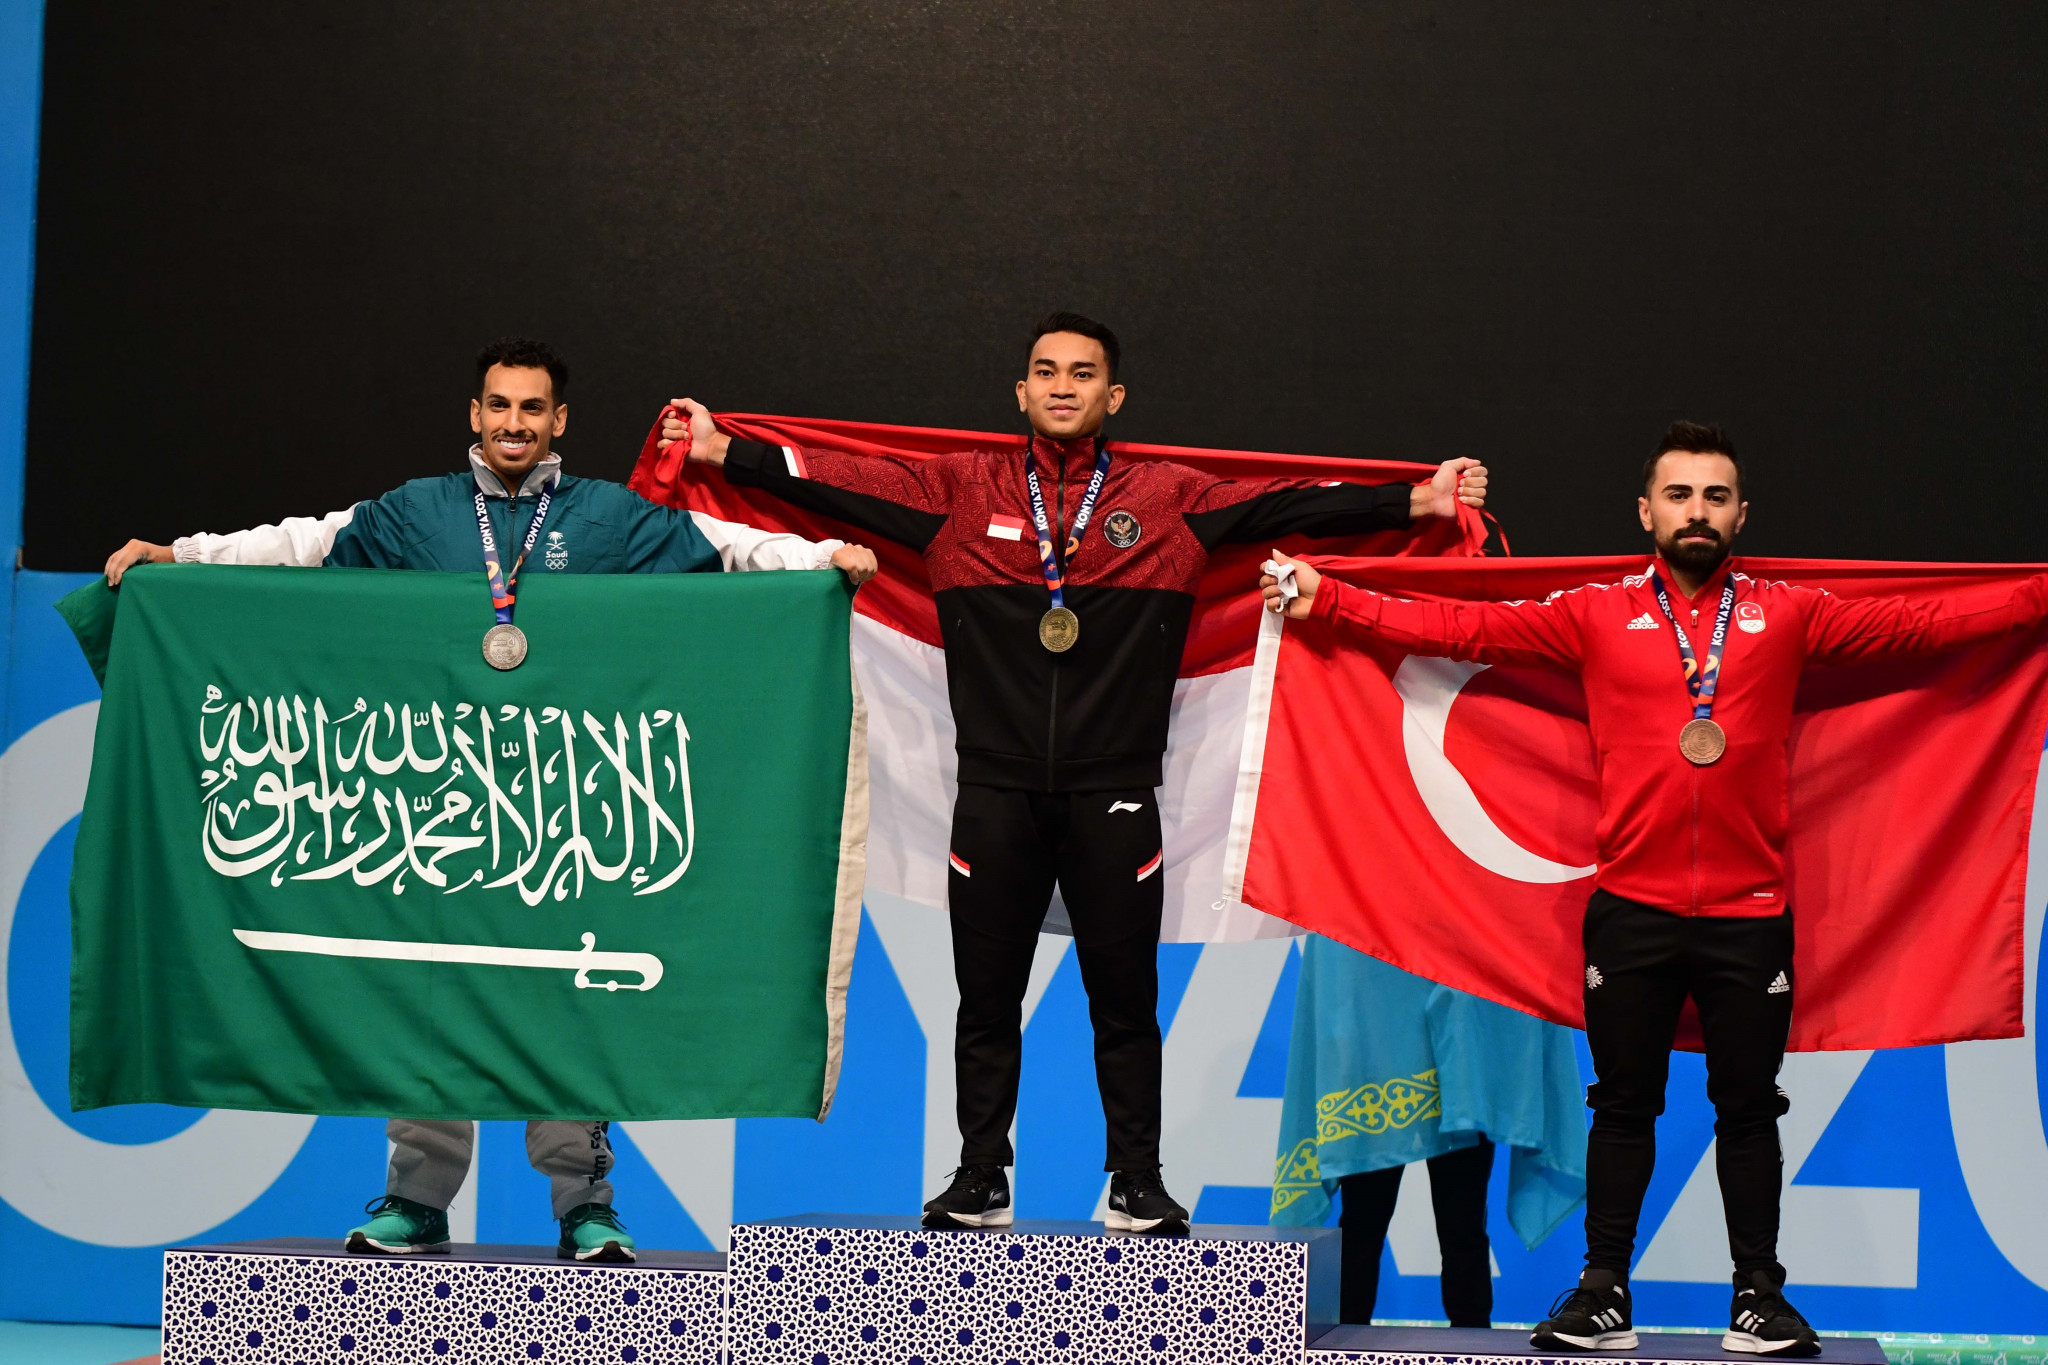 Ricko Saputra, centre, stands at the top of the podium after winning men’s 61kg title ©Konya 2021